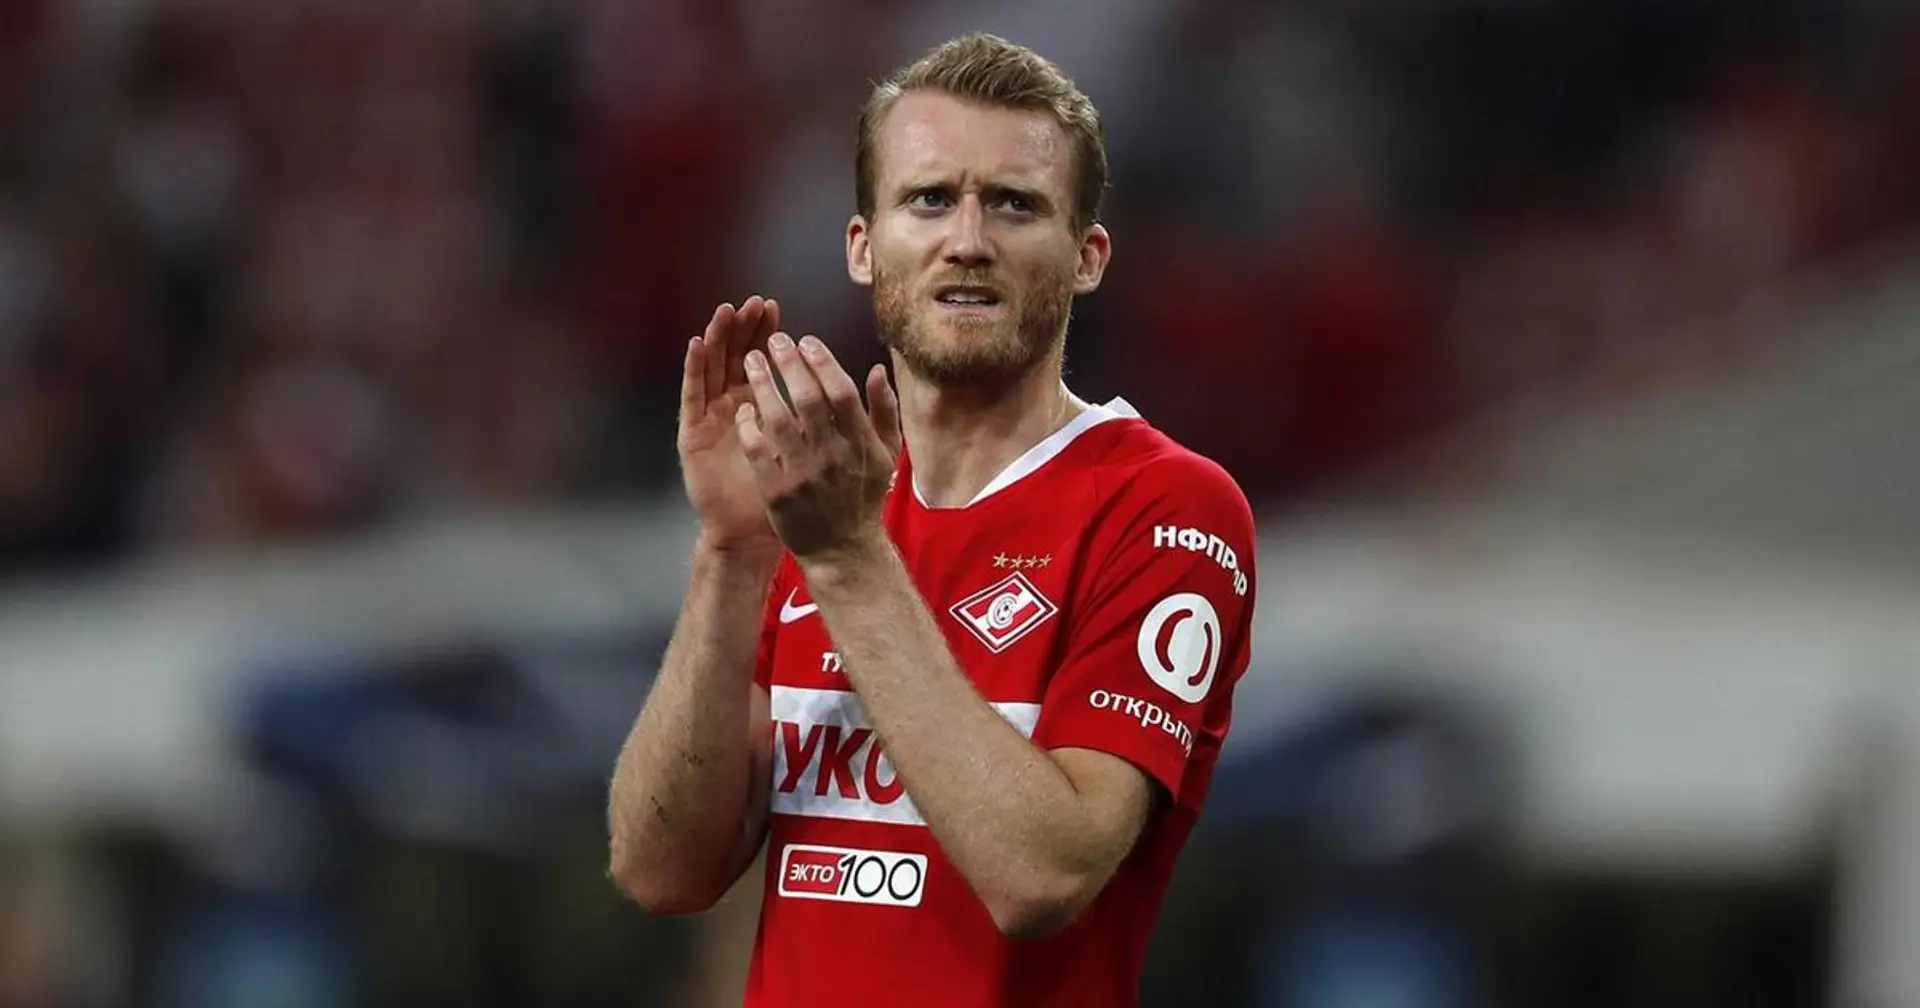 World Cup winner Andre Schurrle announces shocking retirement at 29